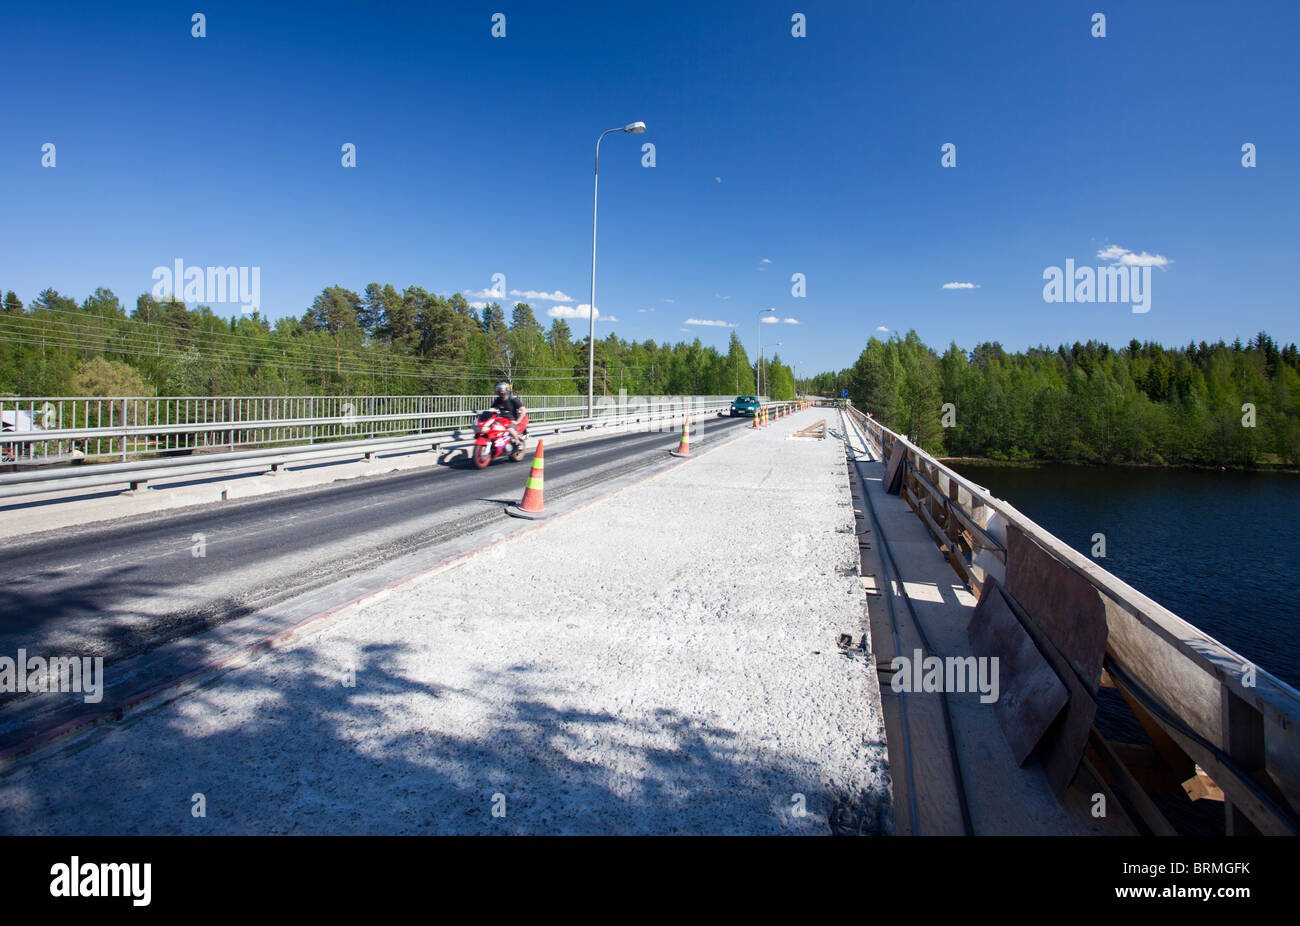 Biker crossing a road bridge where half of the deck is under repairs and asphalt has been stripped away , Finland Stock Photo